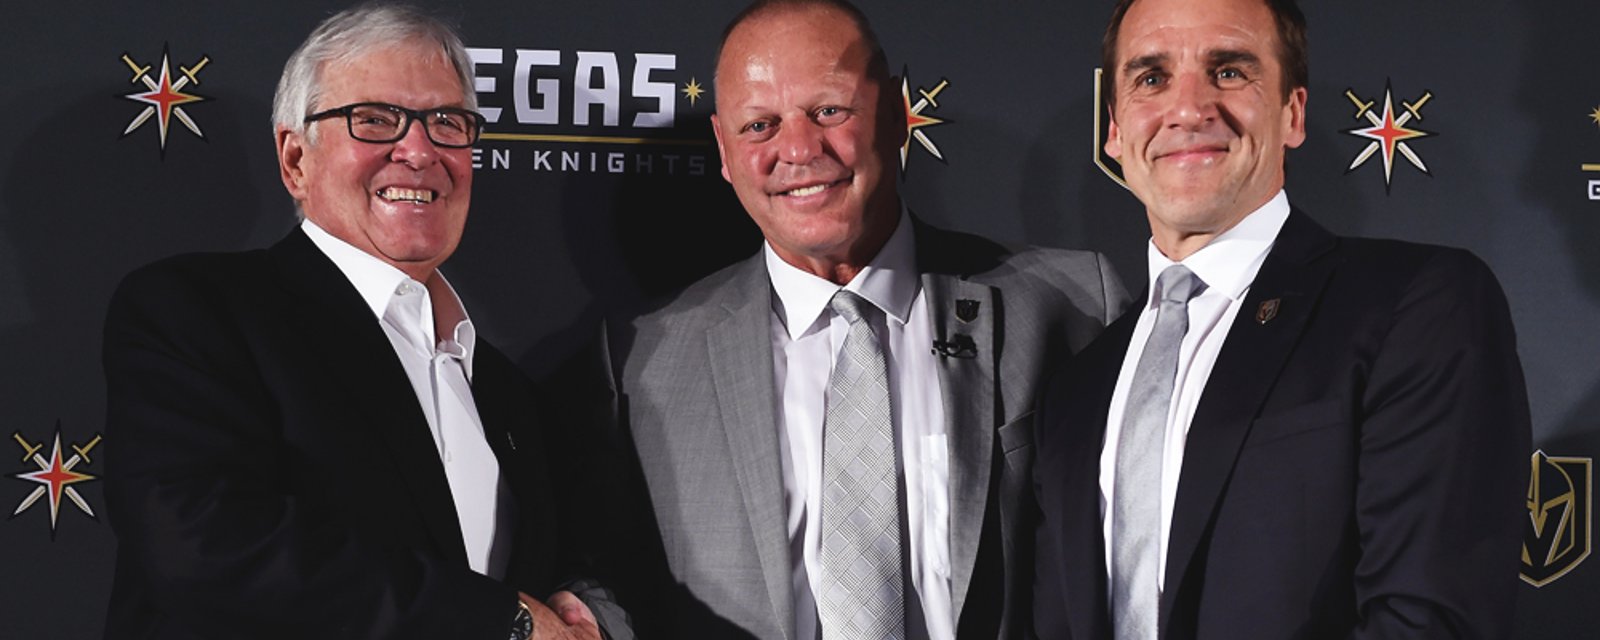 Report: Vegas Golden Knights have deals in place with 3 NHL teams.